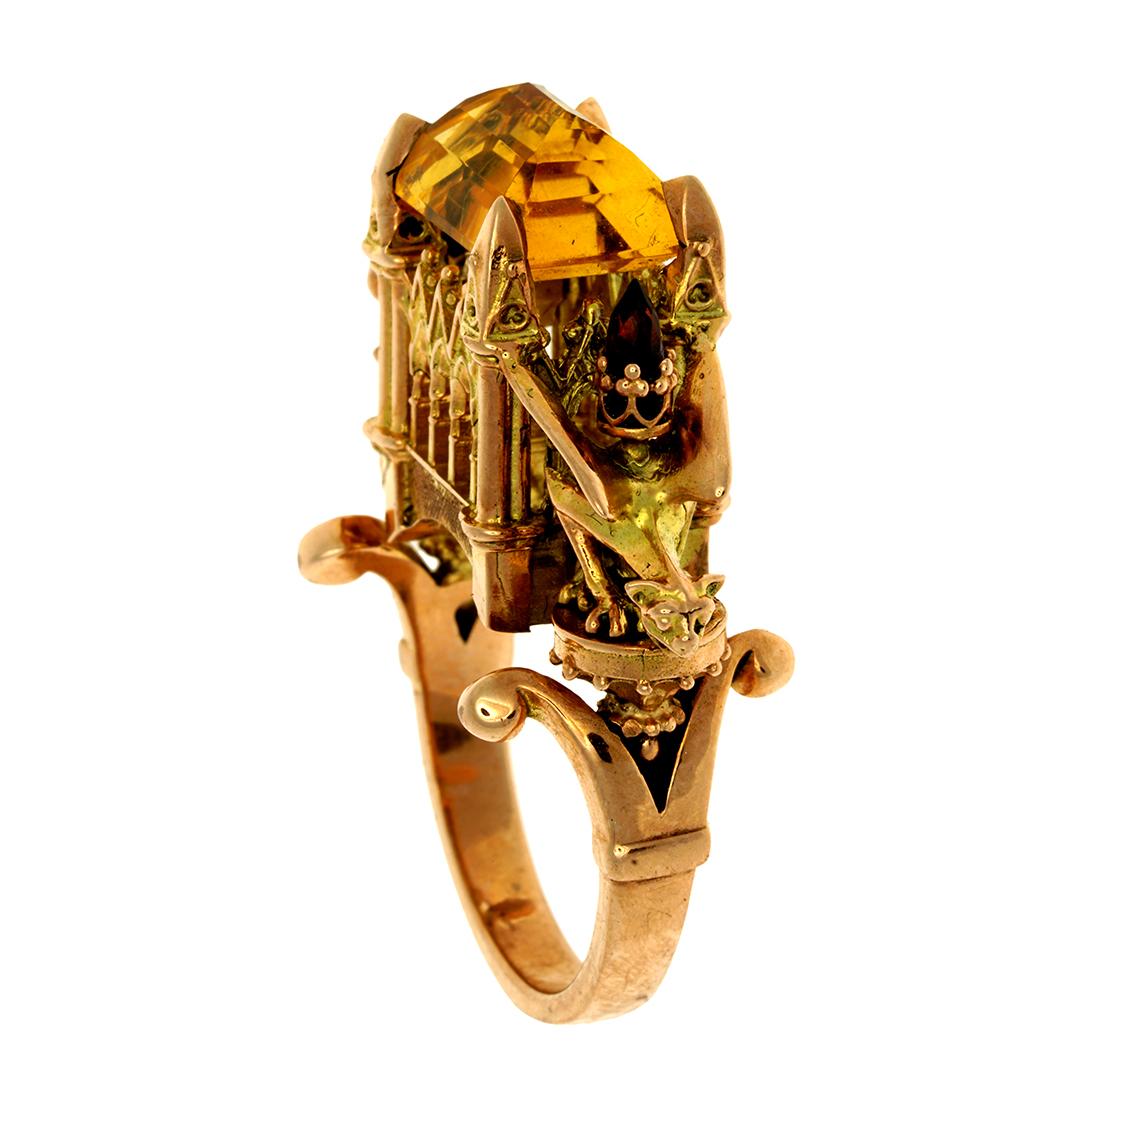 William Llewellyn Griffiths 9 Karat Gold Citrin Euphoric Triumph Kathedrale Ring (Barock)